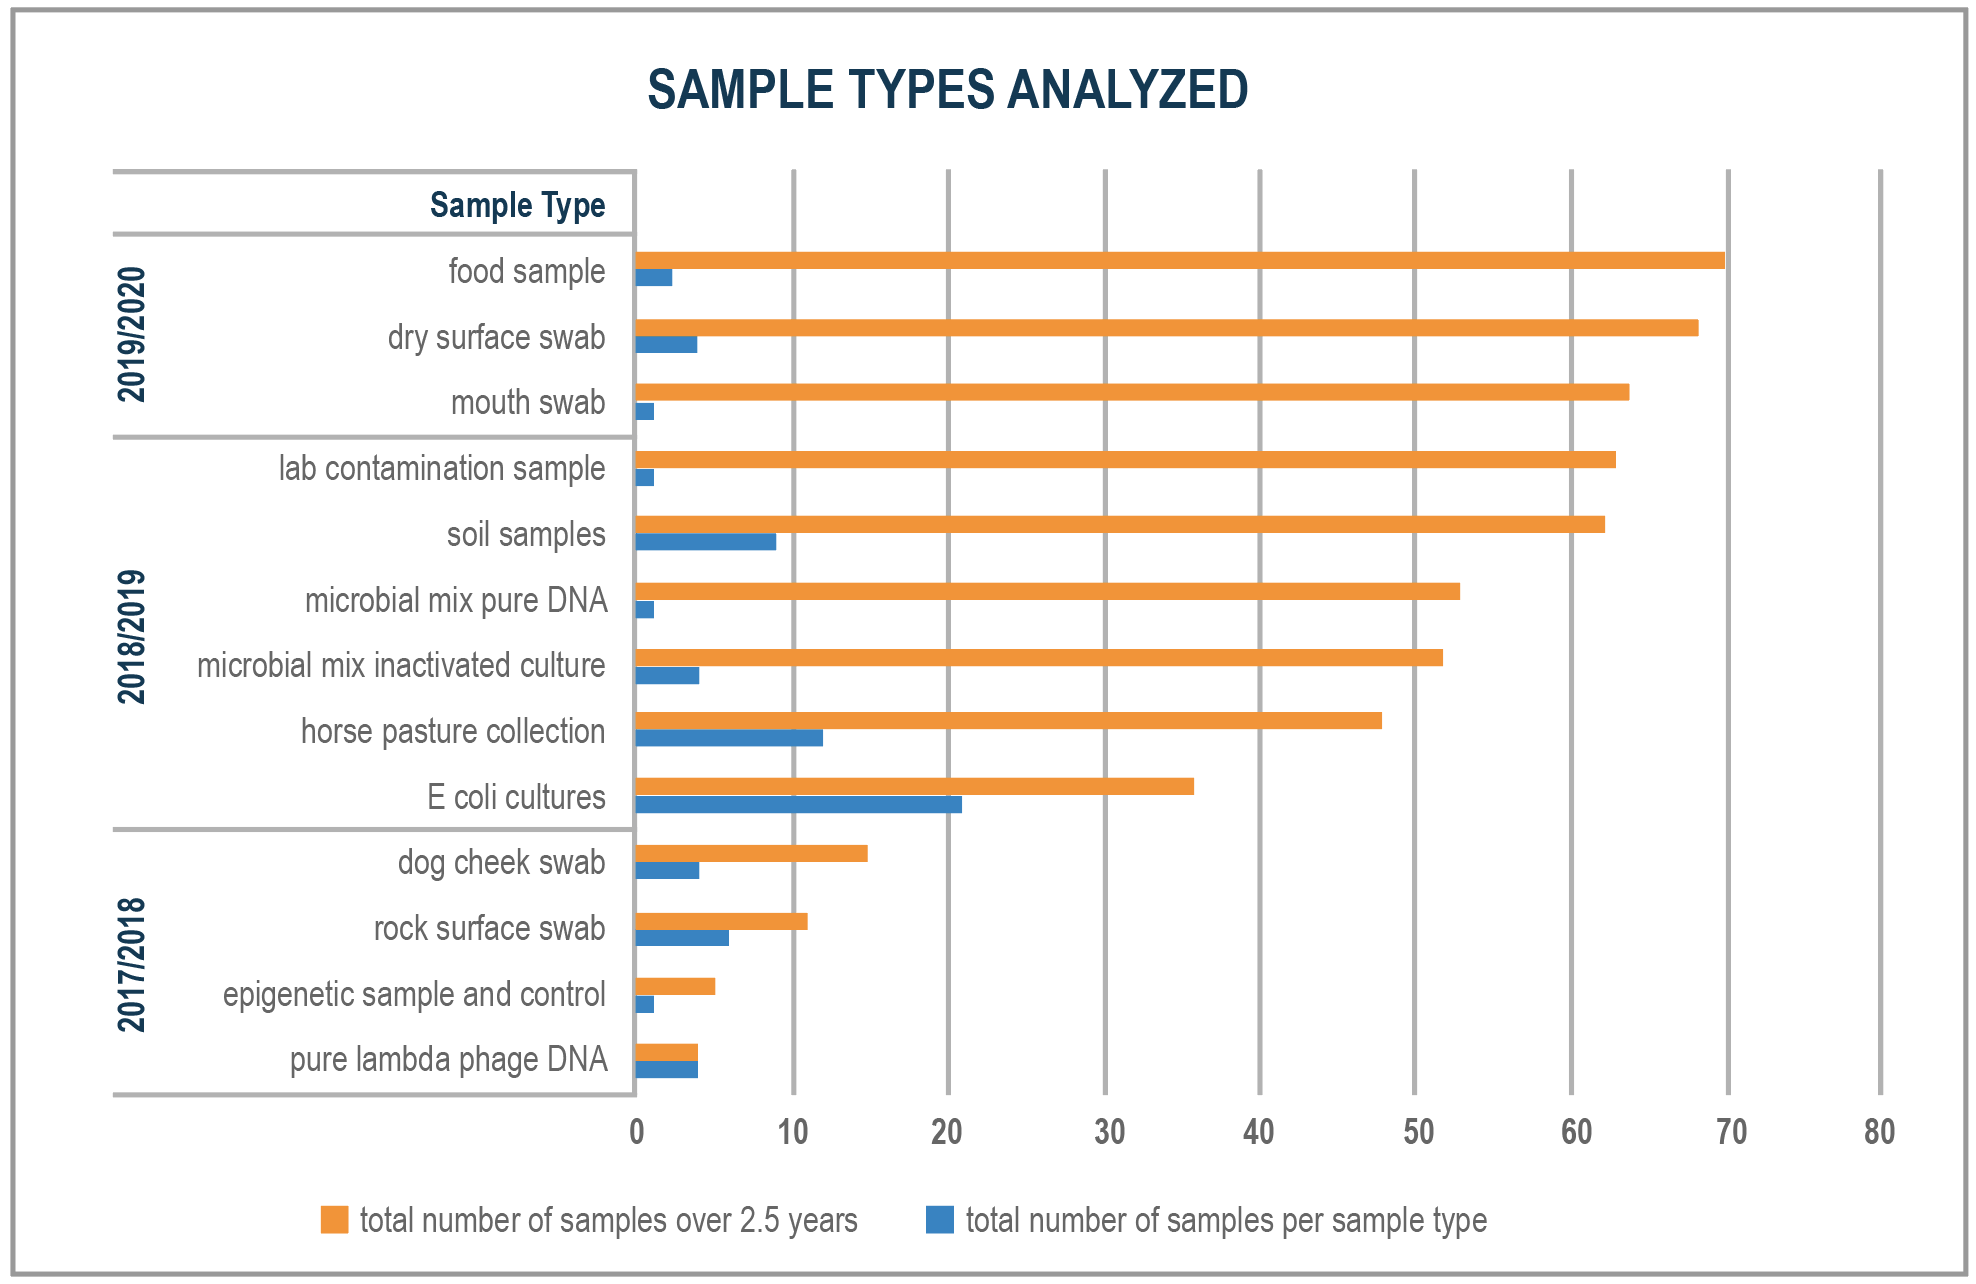 Figure 2 - Chart of Sample Types Analyzed from 2017 to 2020